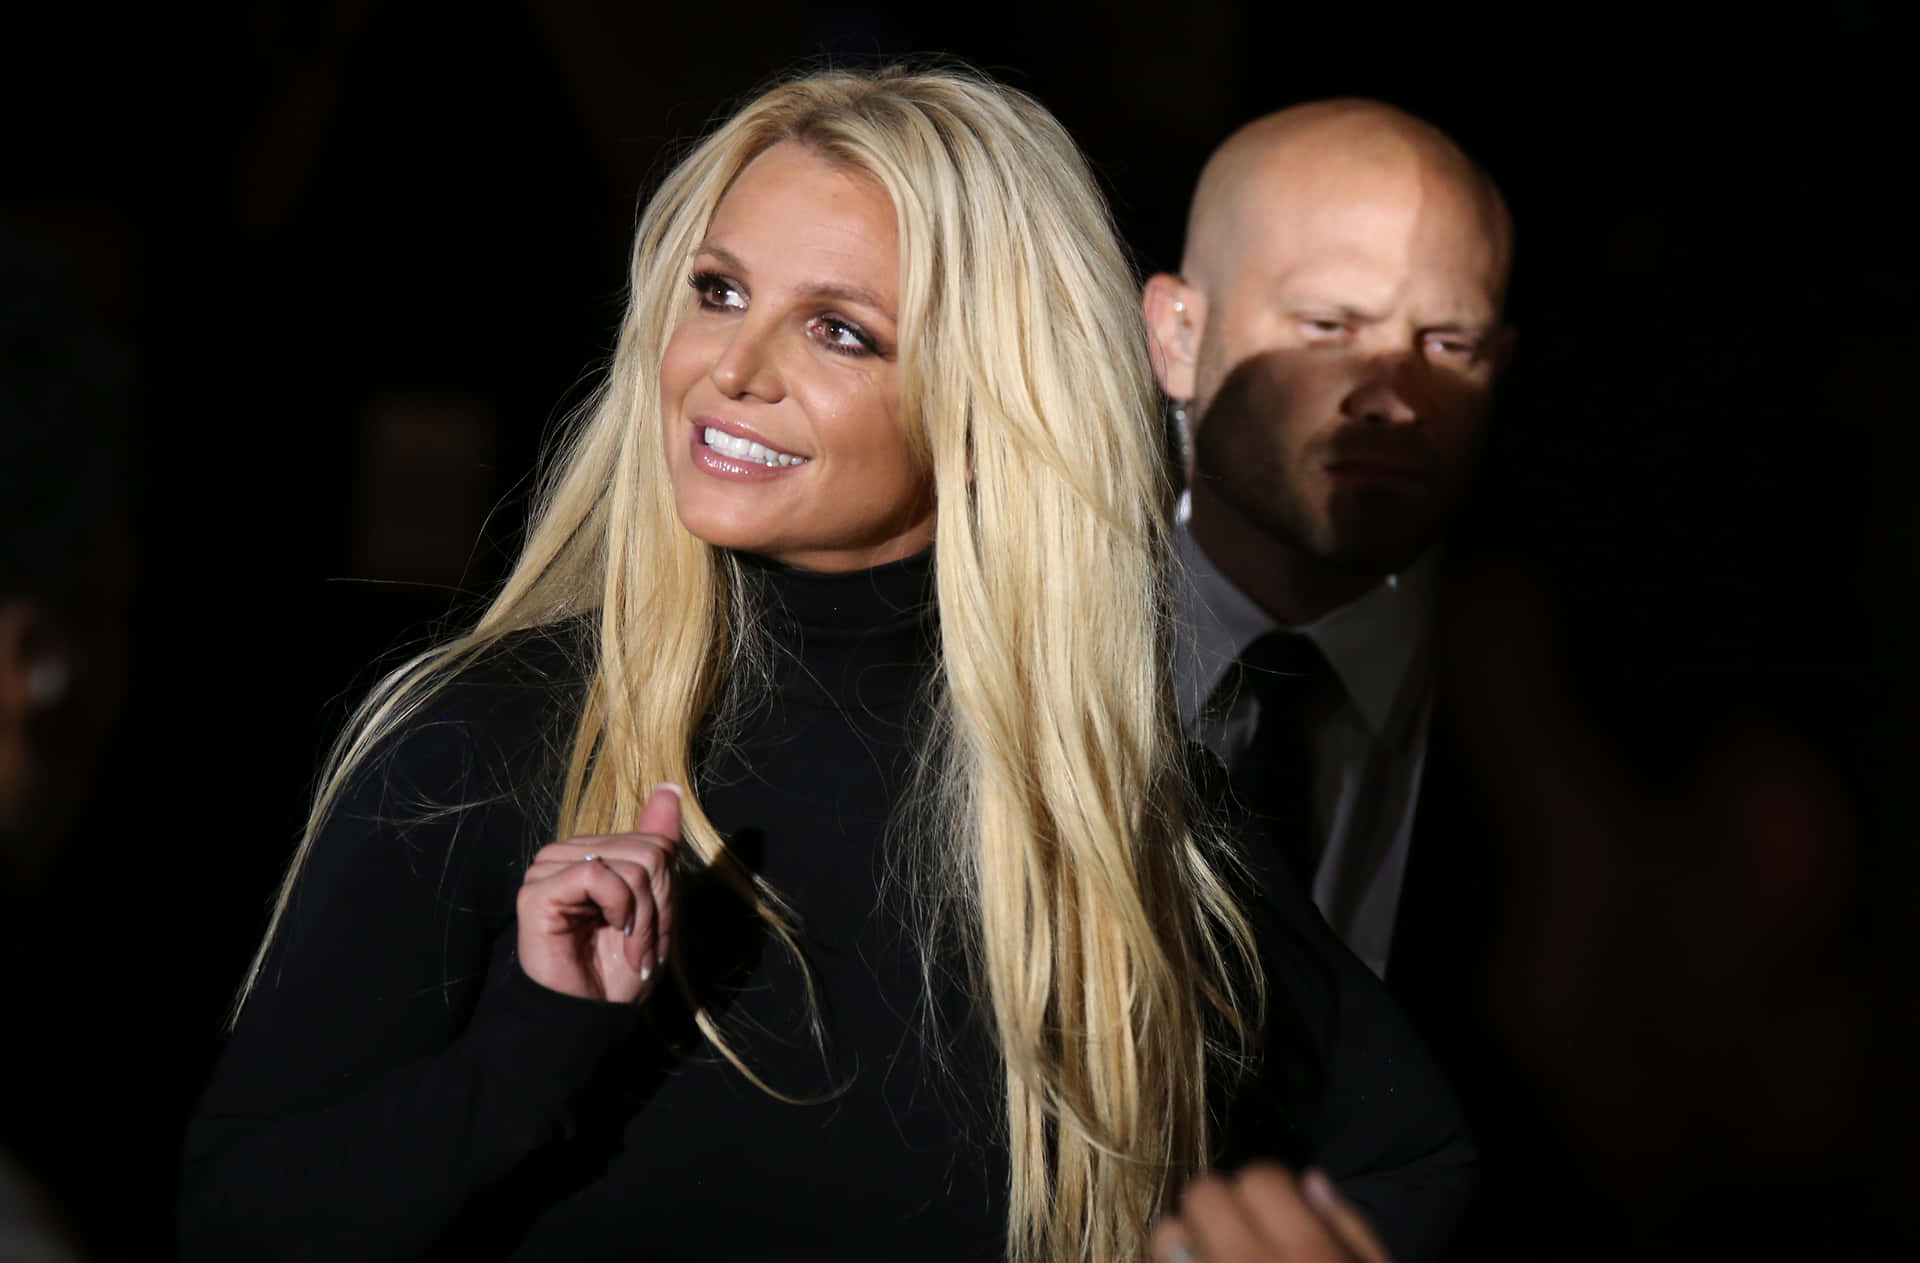 Pop Star Britney Spears Lights Up The Stage